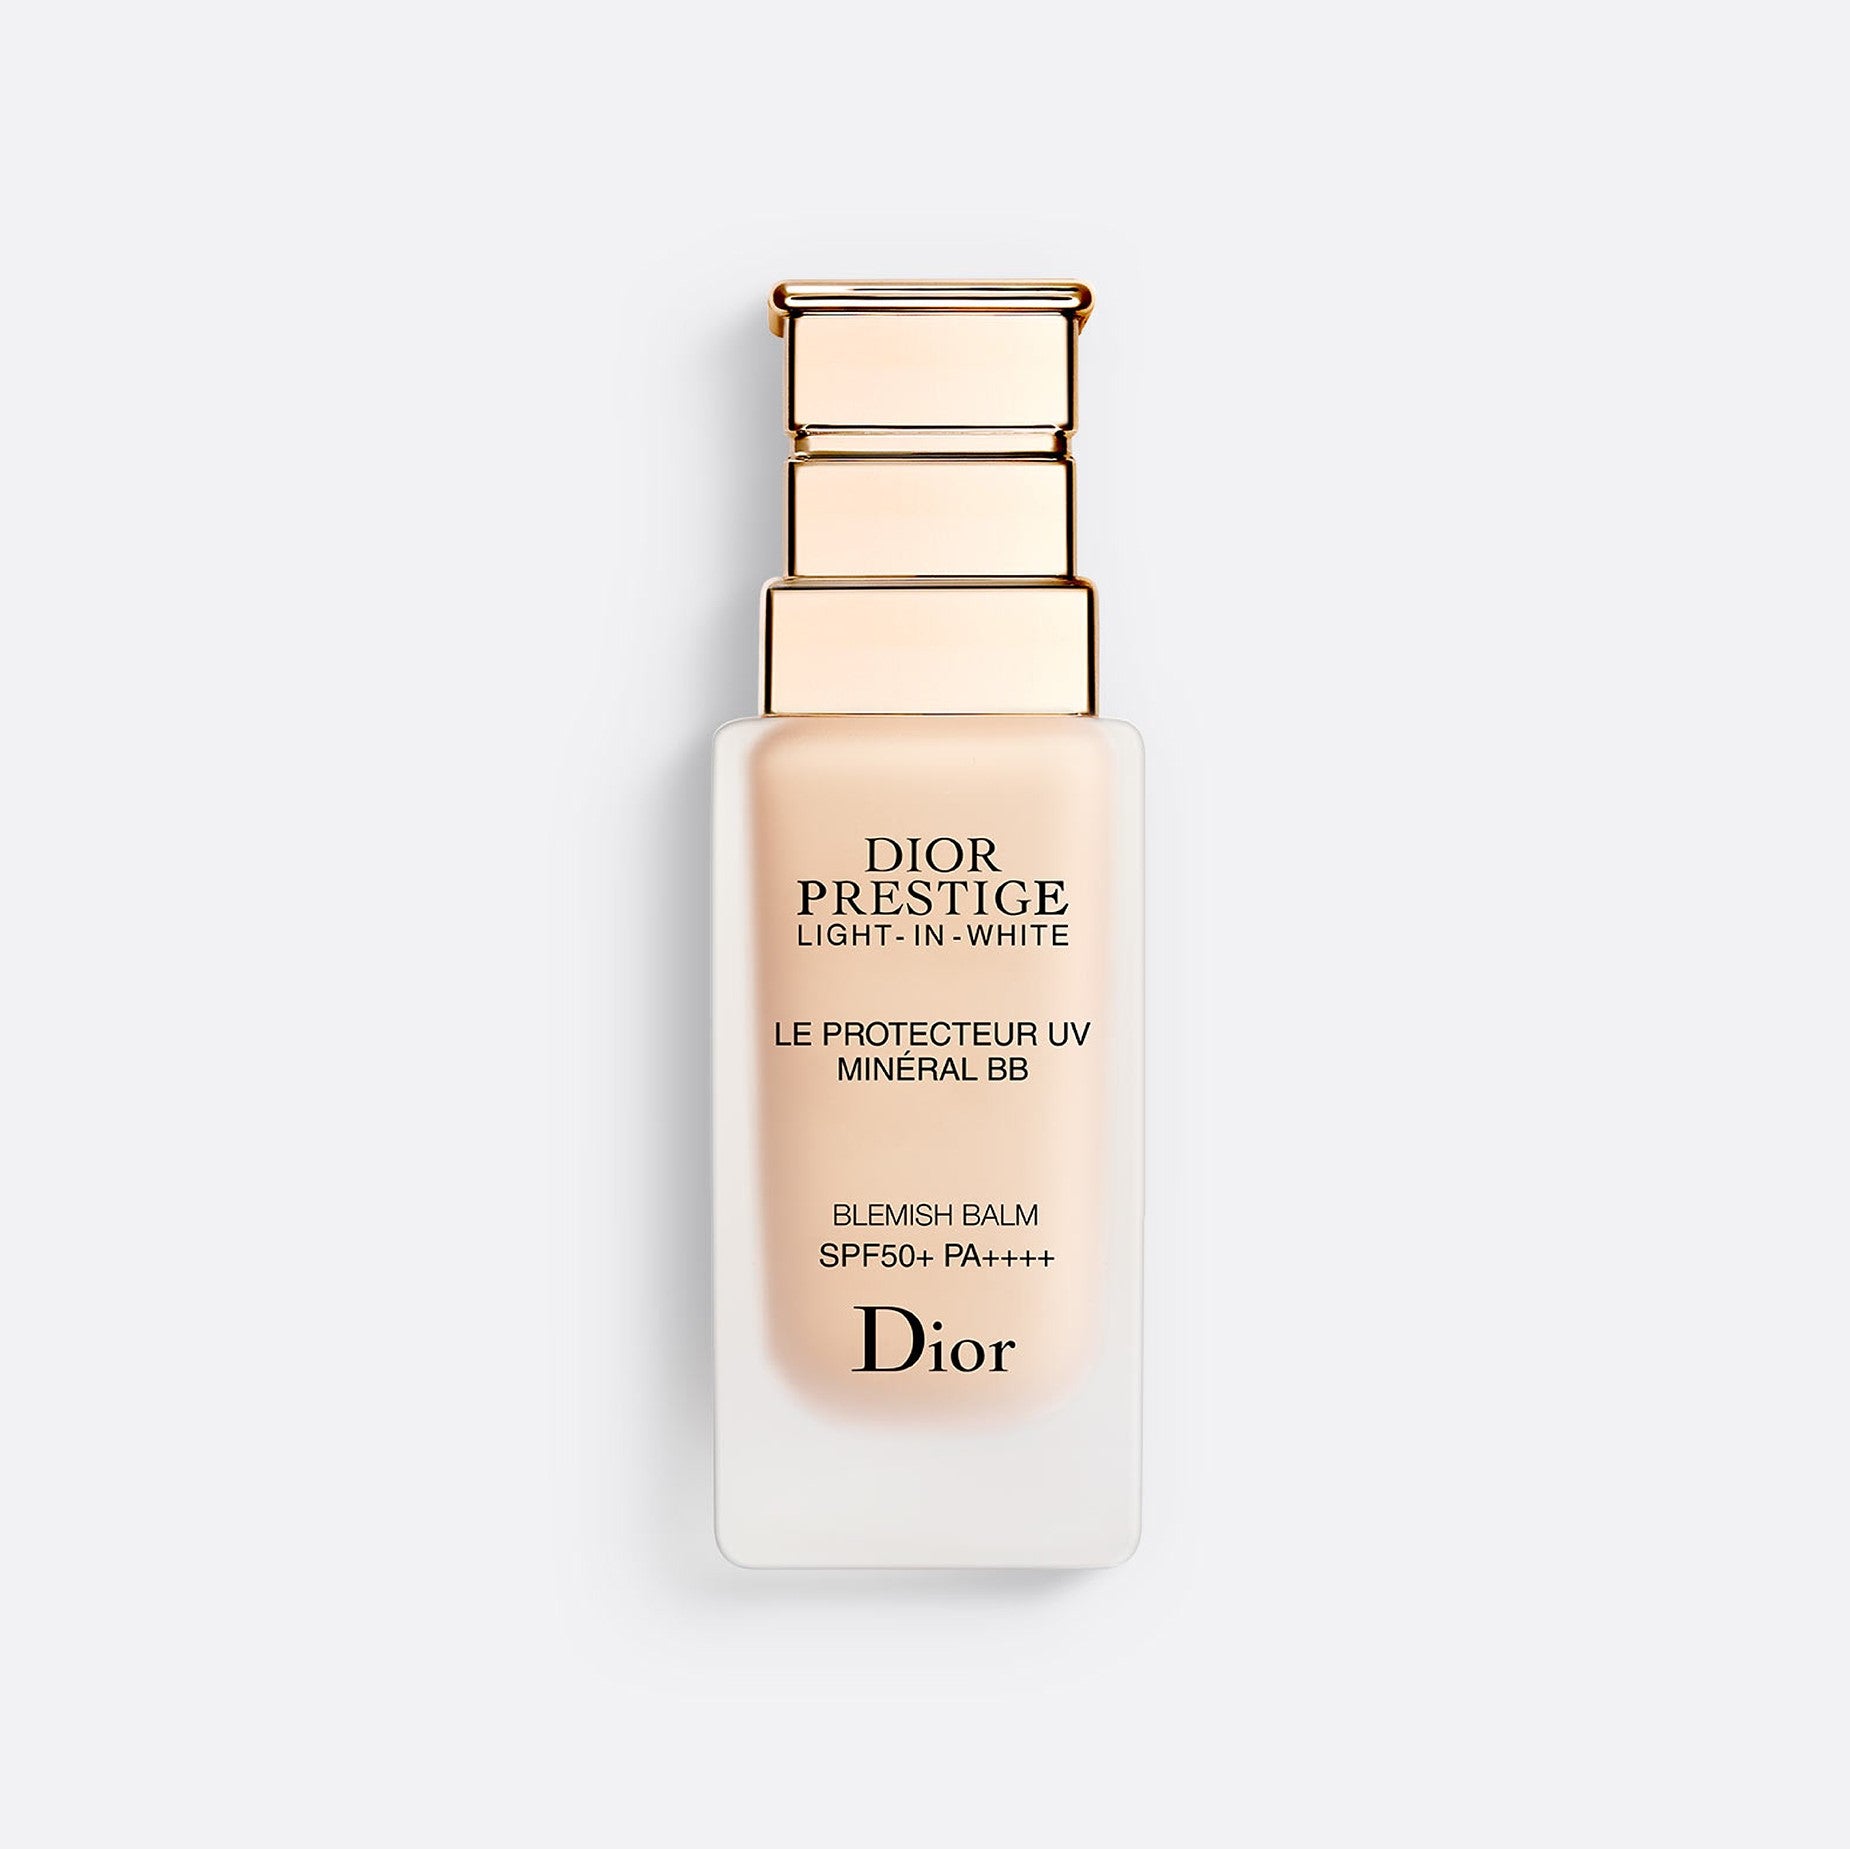 DIOR PRESTIGE LIGHT-IN-WHITE LE PROTECTEUR UV MINÉRAL BB (SPF 50+ PA+++) ~ Tinted sunscreen - protective and anti-aging emulsion